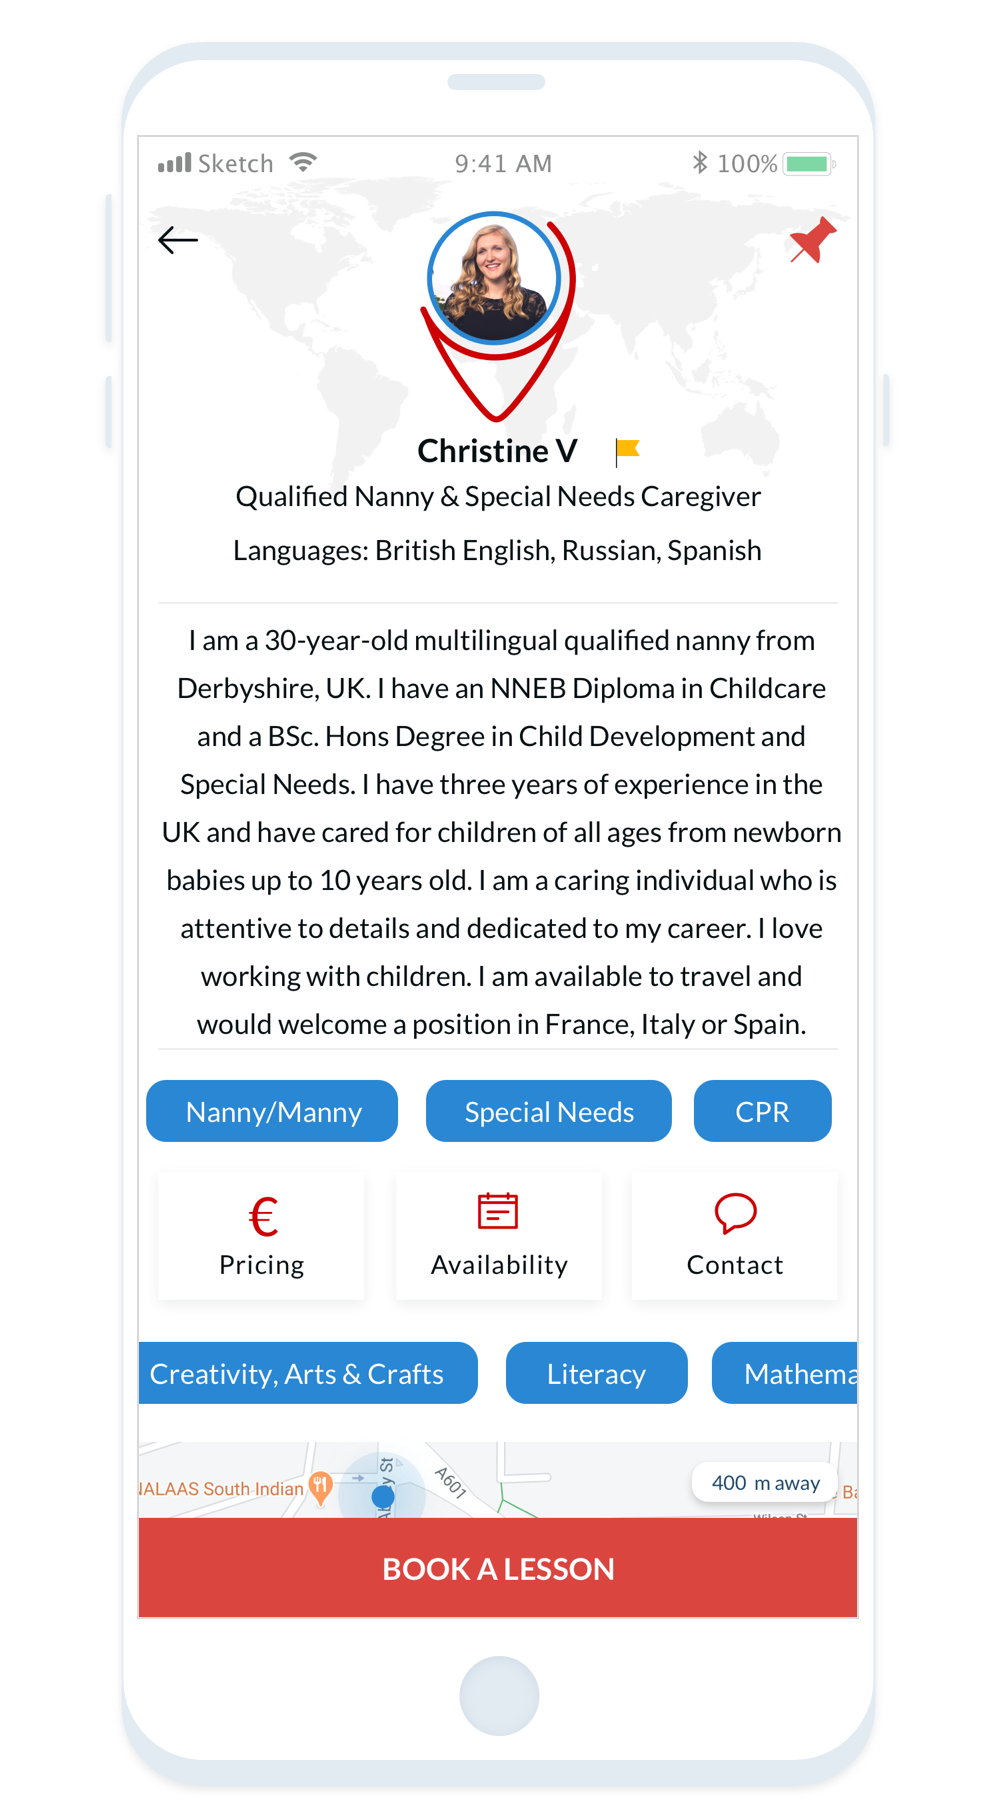 Find and connect with a nanny for special needs on Around App!